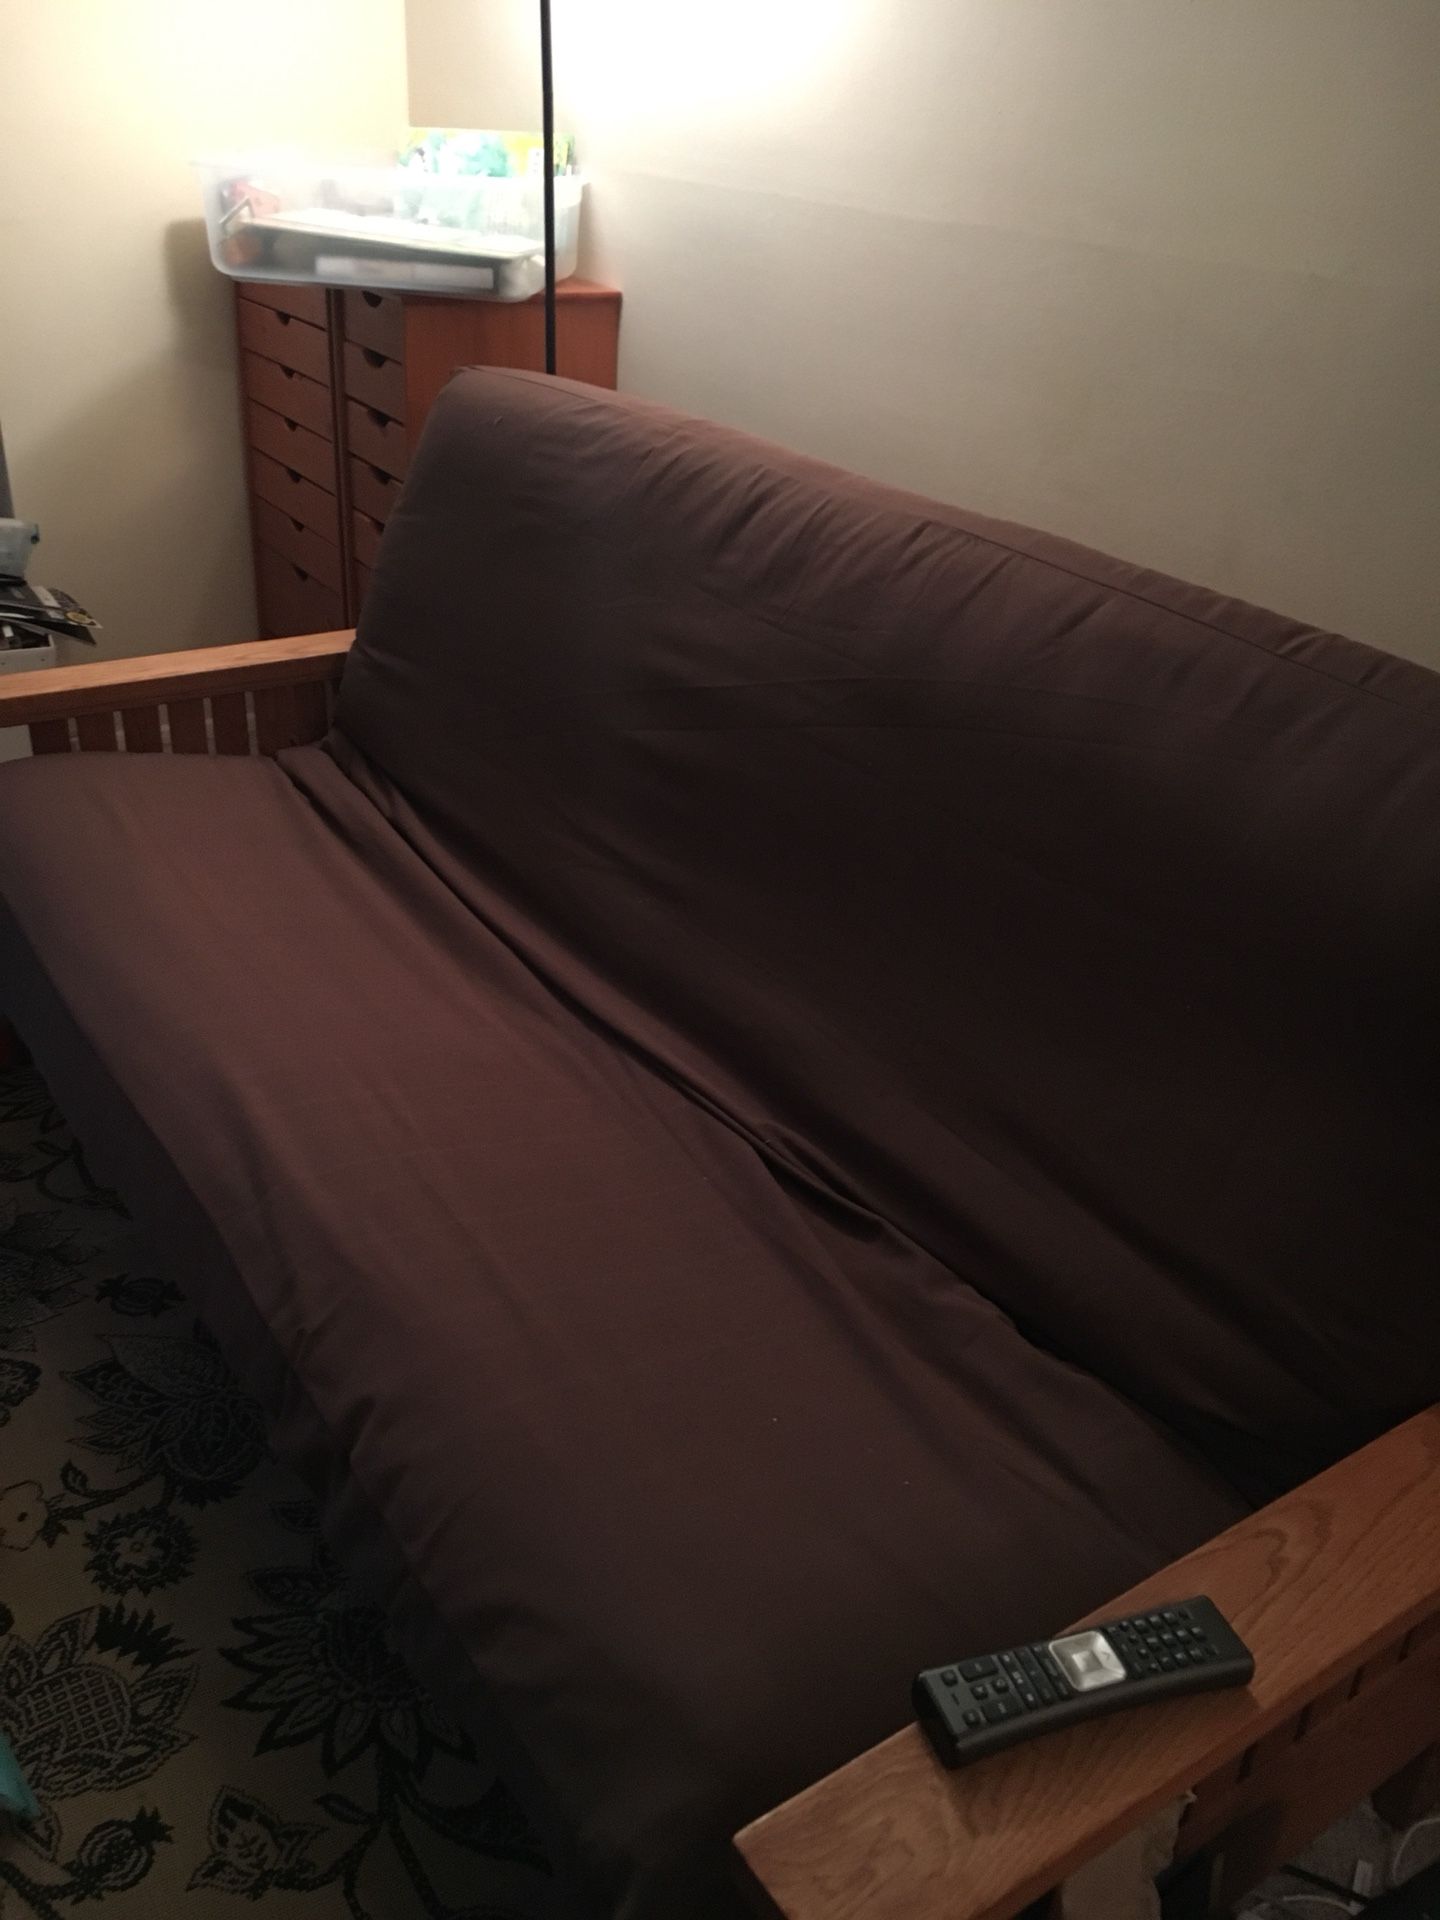 Oak Futon. Will disassemble for easy moving